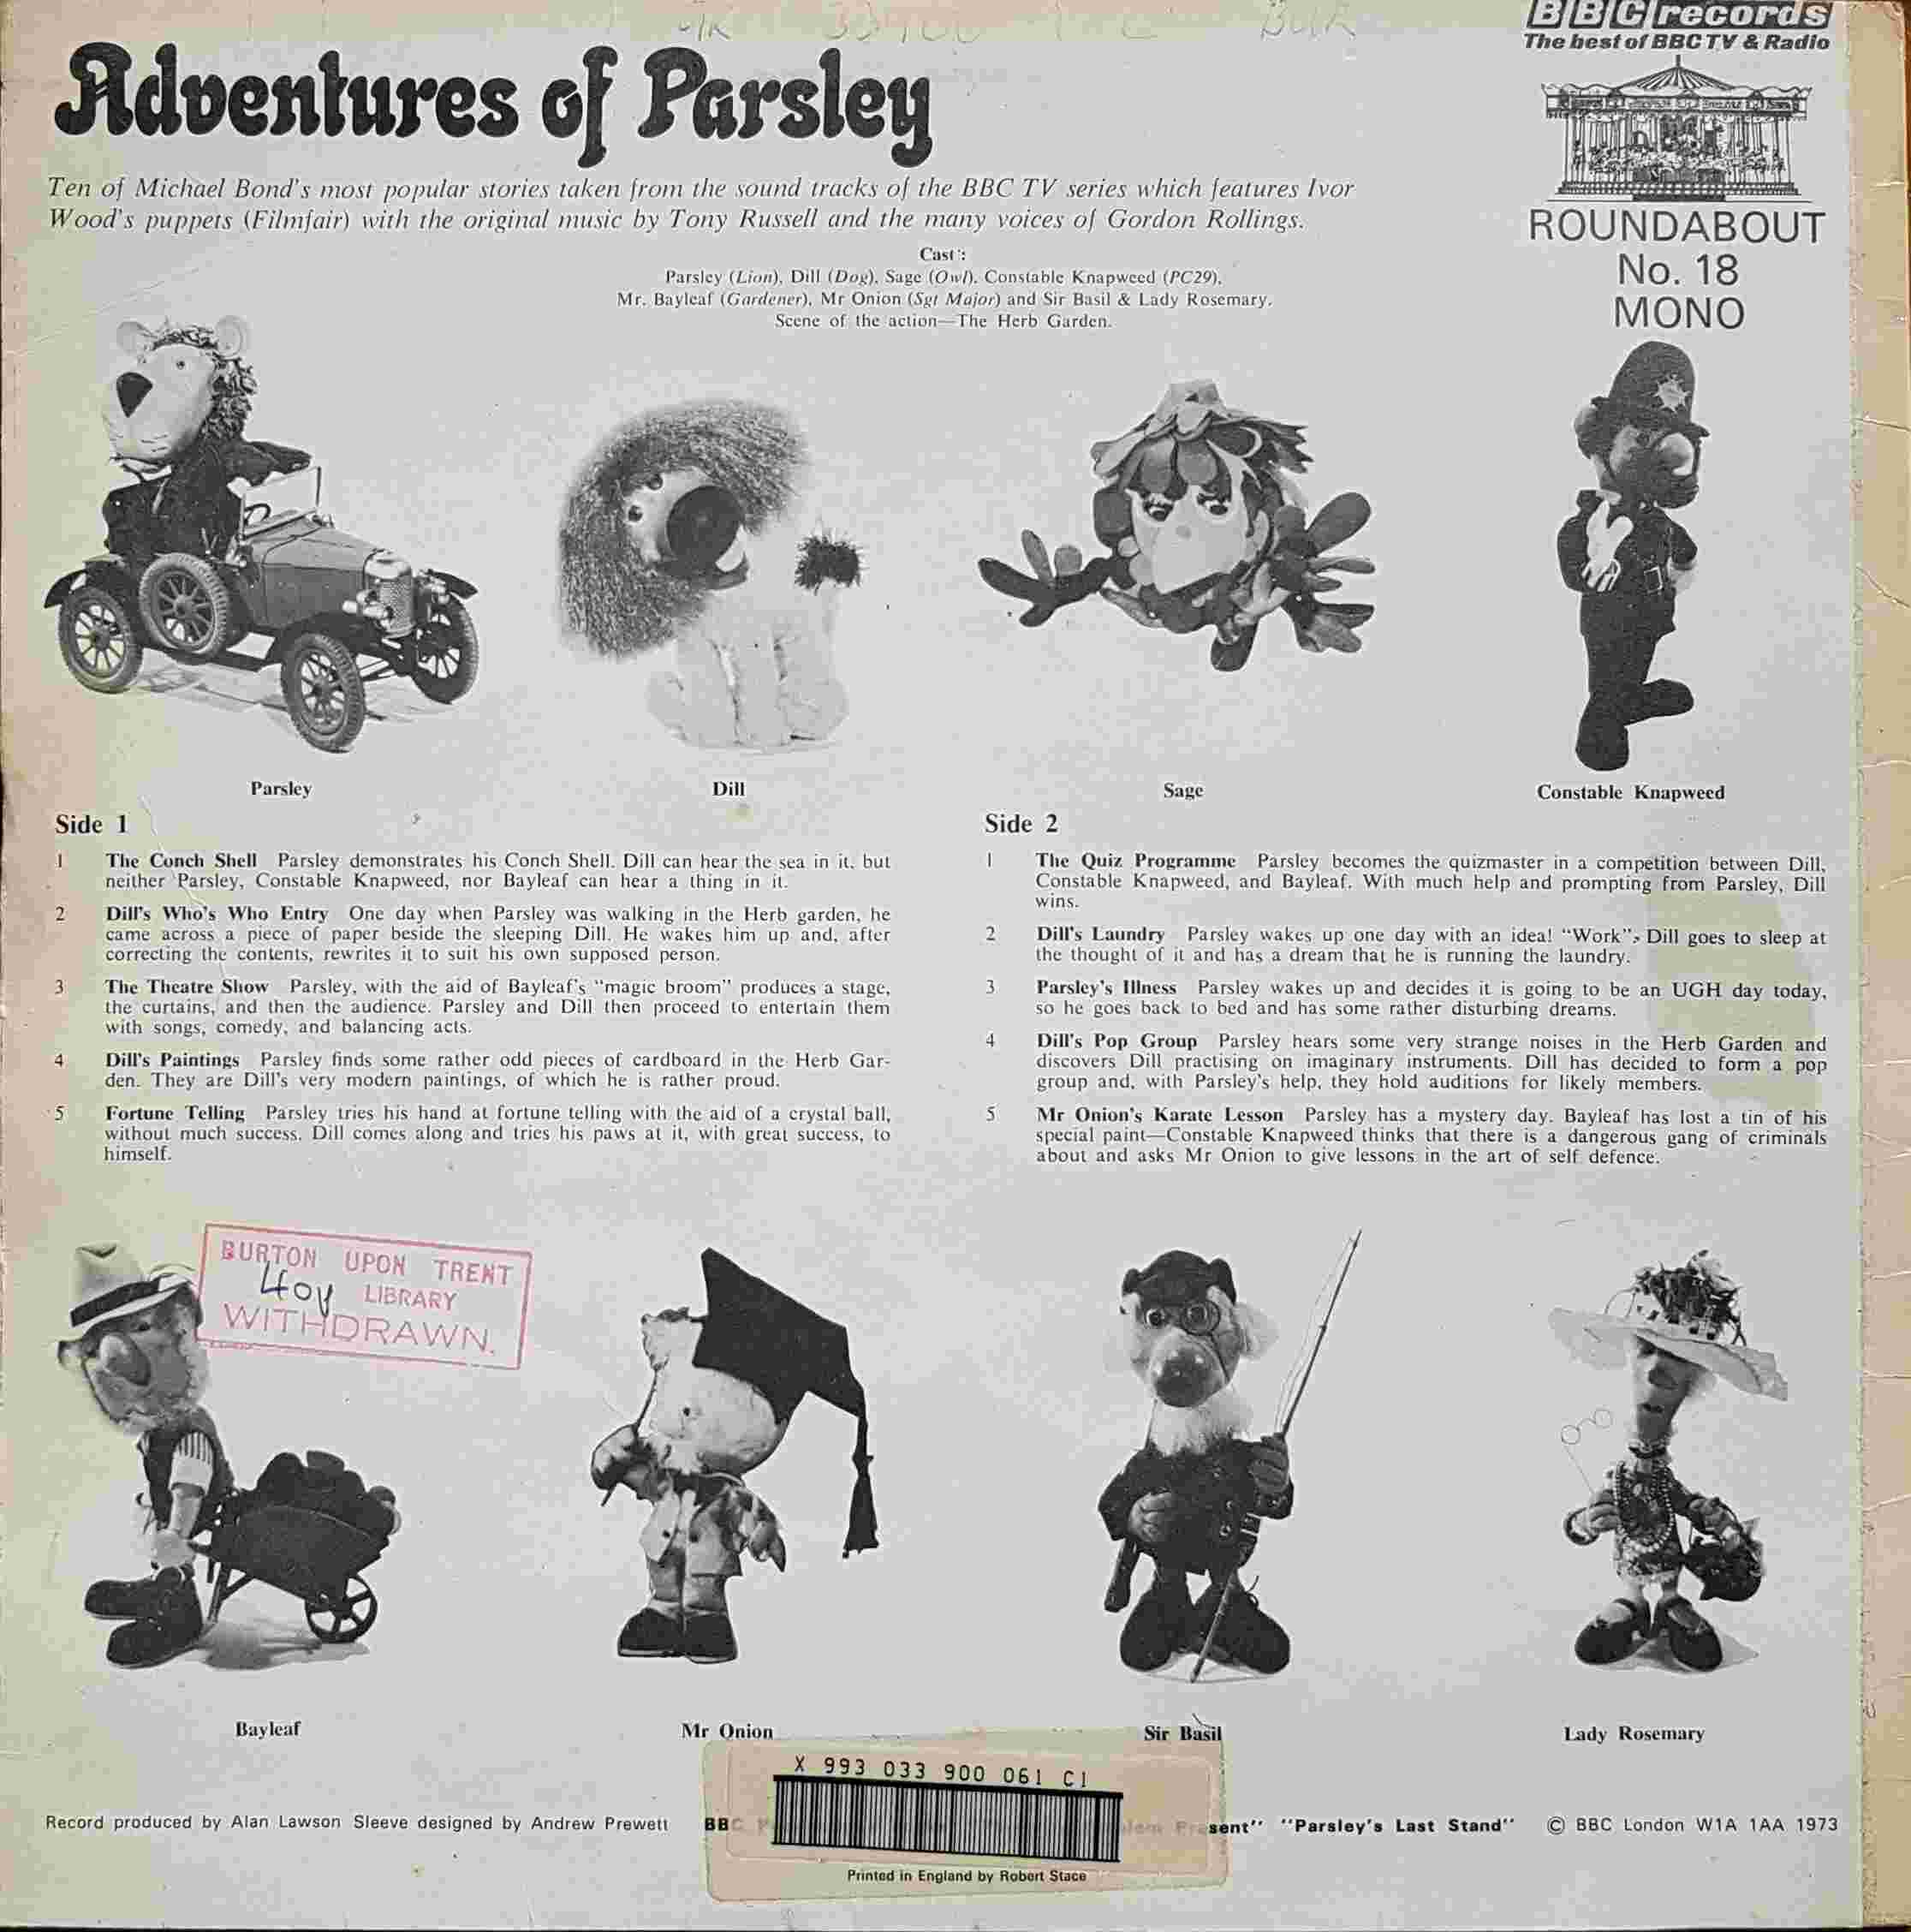 Picture of RBT 18 Adventures of Parsley by artist Michael Bond from the BBC records and Tapes library